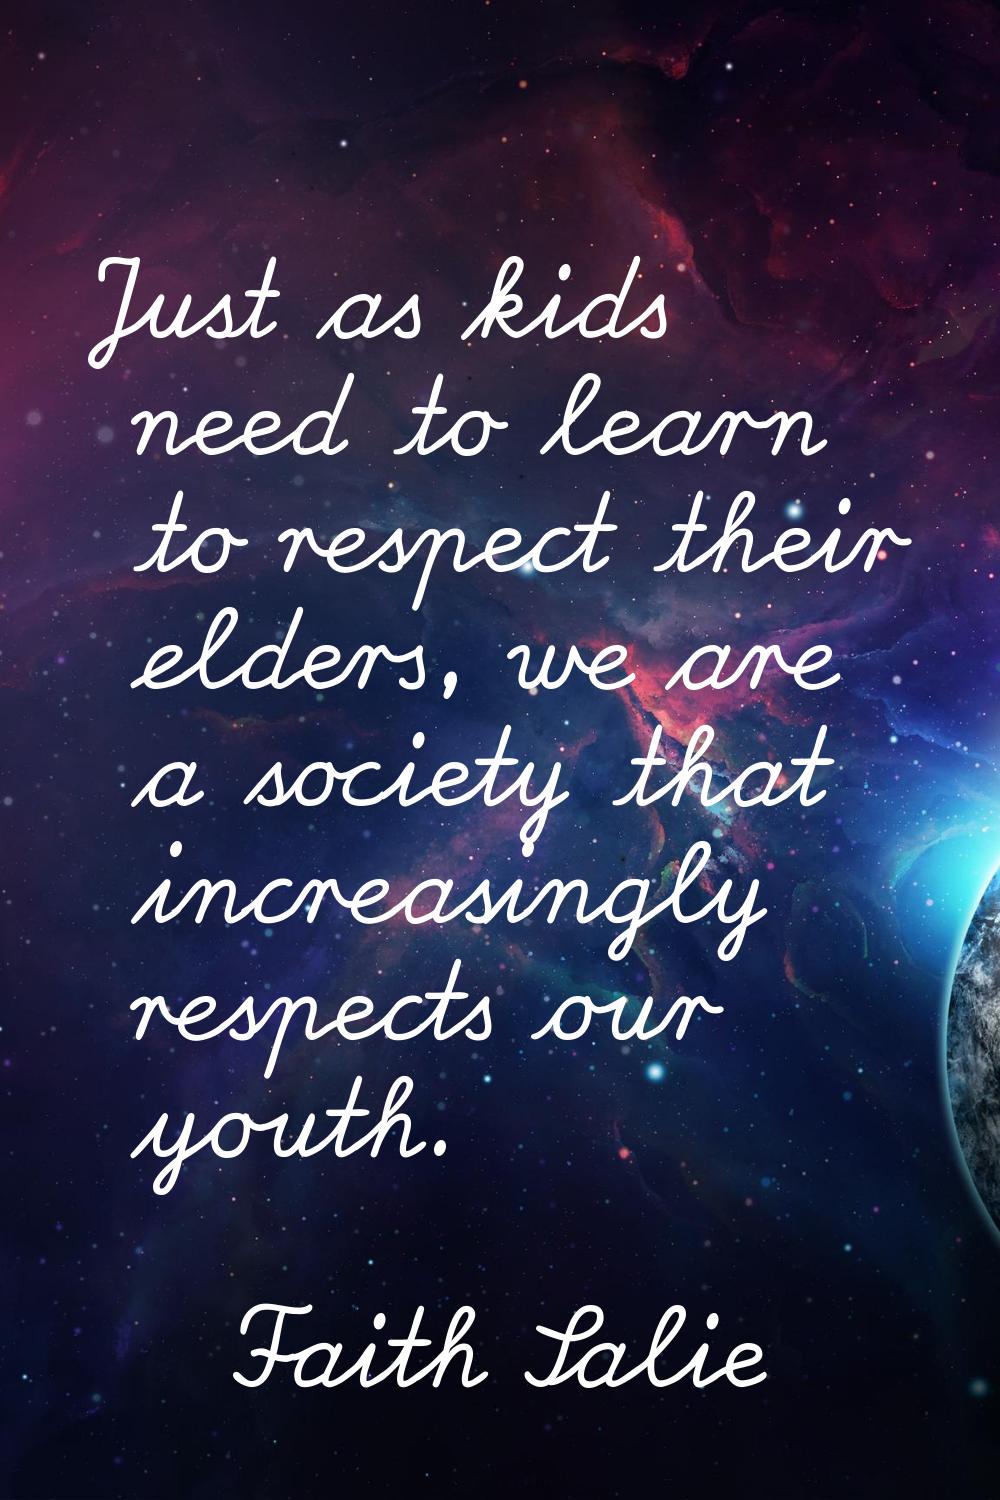 Just as kids need to learn to respect their elders, we are a society that increasingly respects our